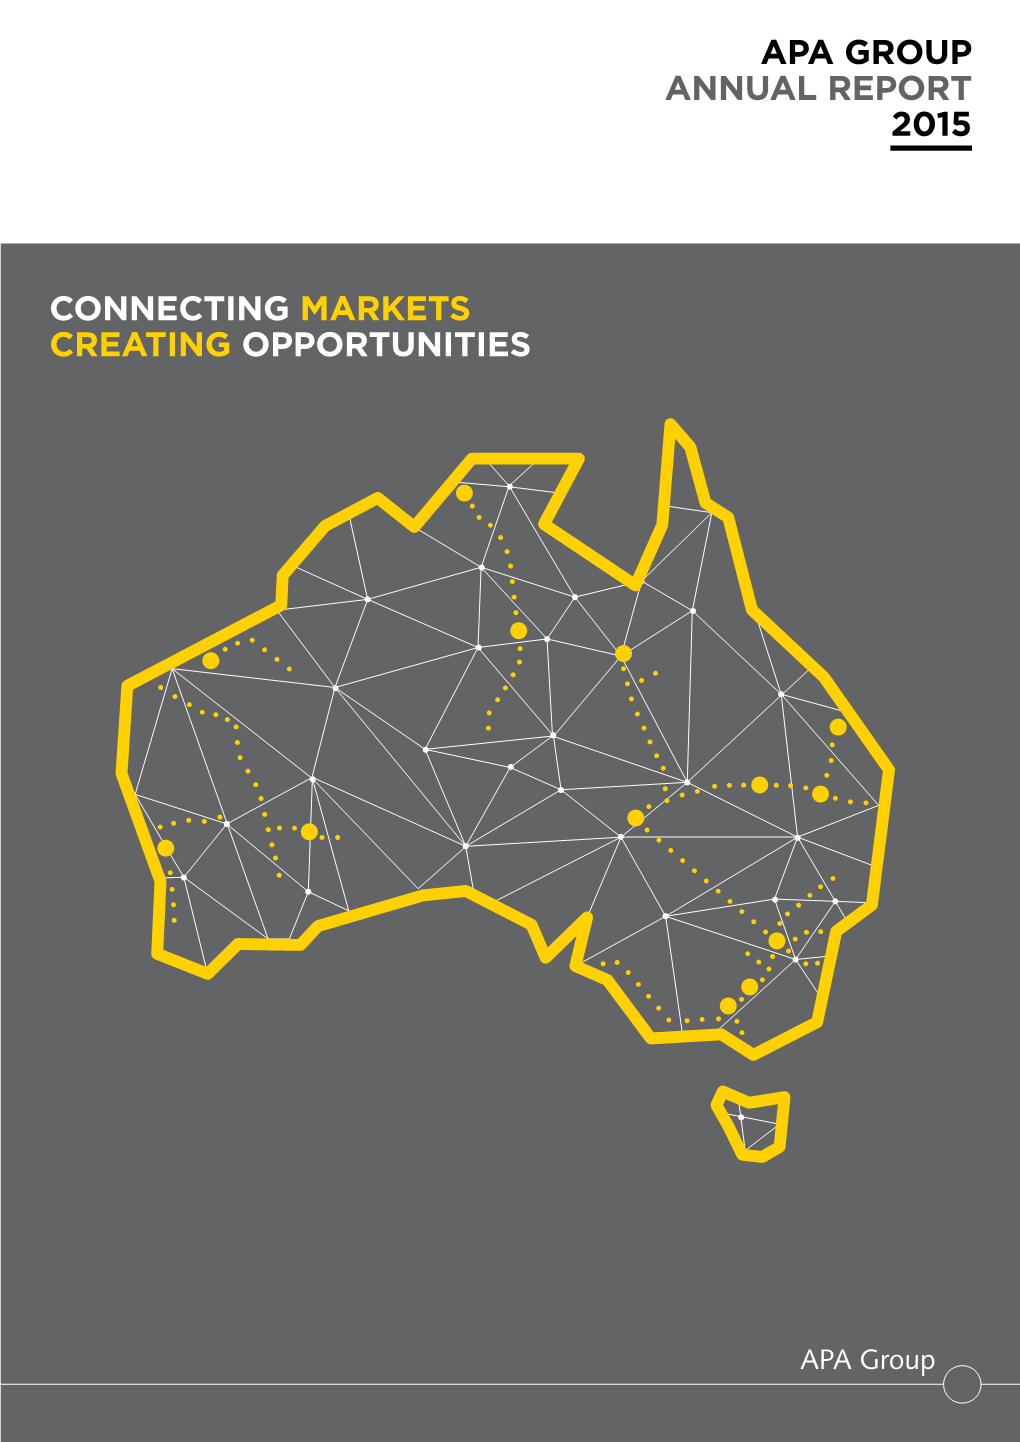 Apa Group Annual Report 2015 Connecting Markets